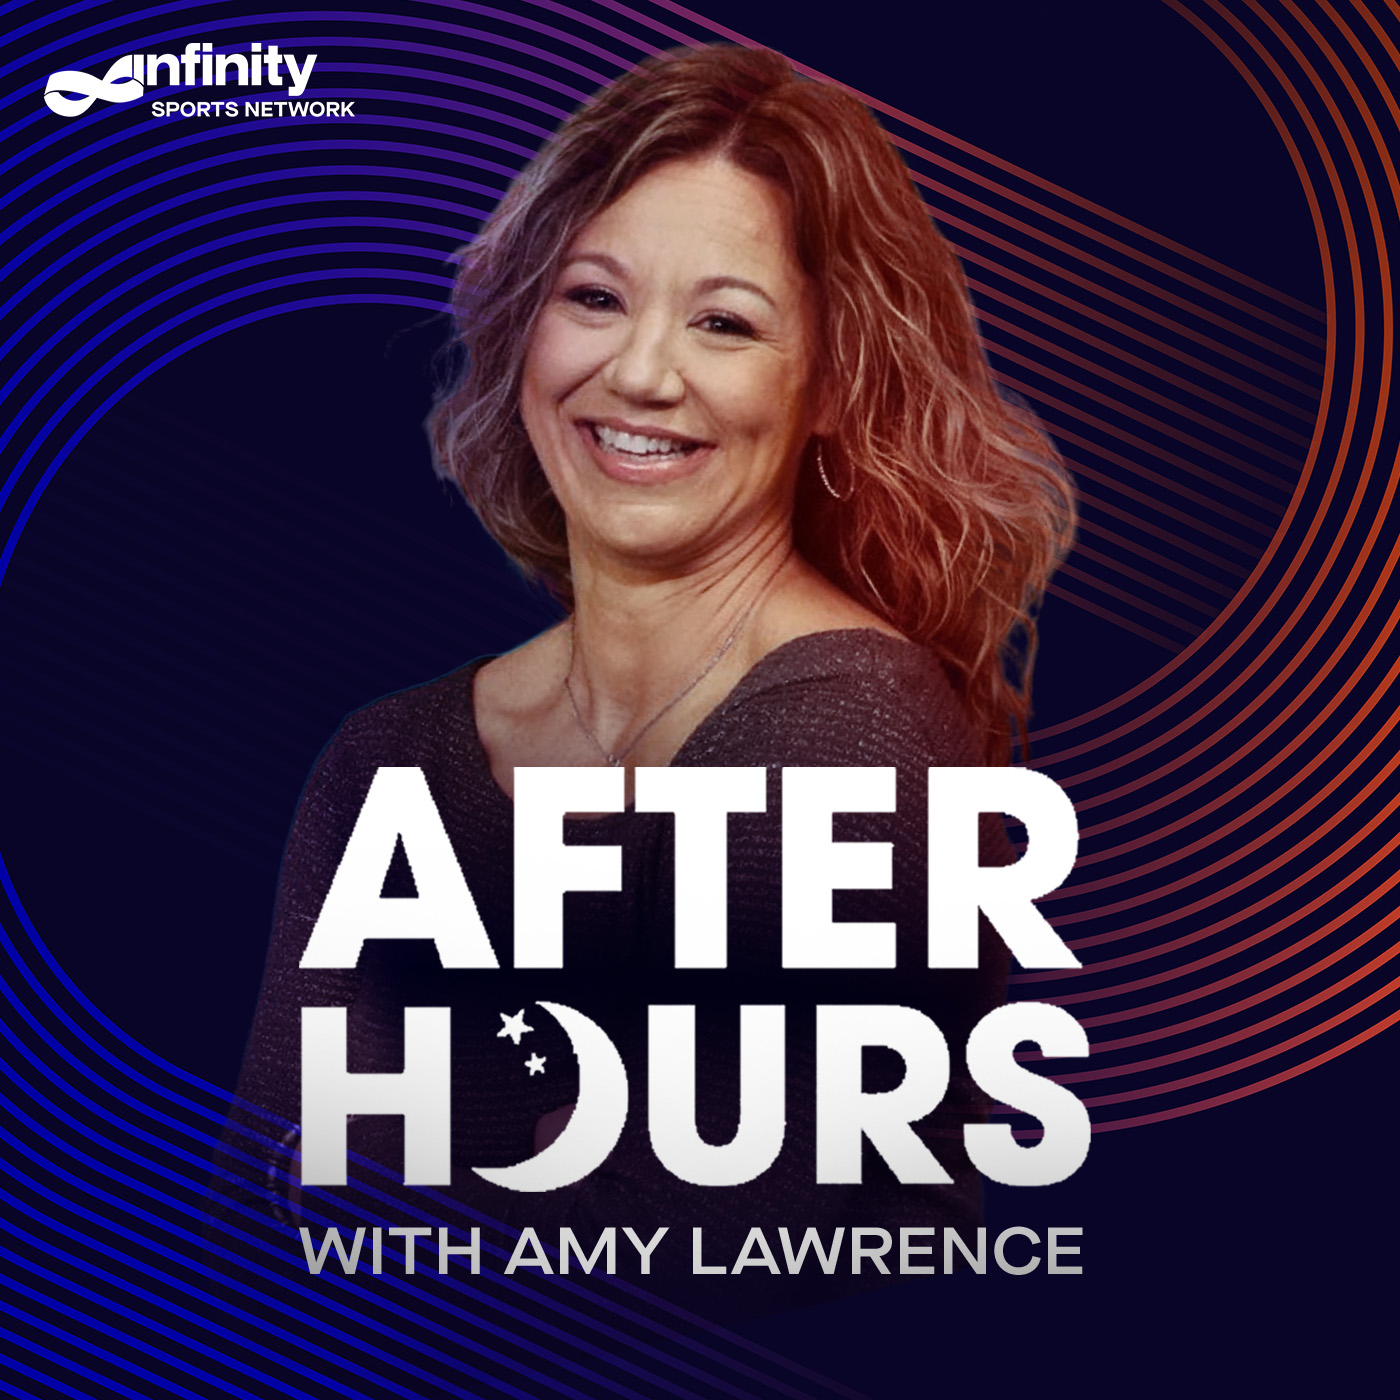 2-22-22 After Hours PODCAST: Hour 2